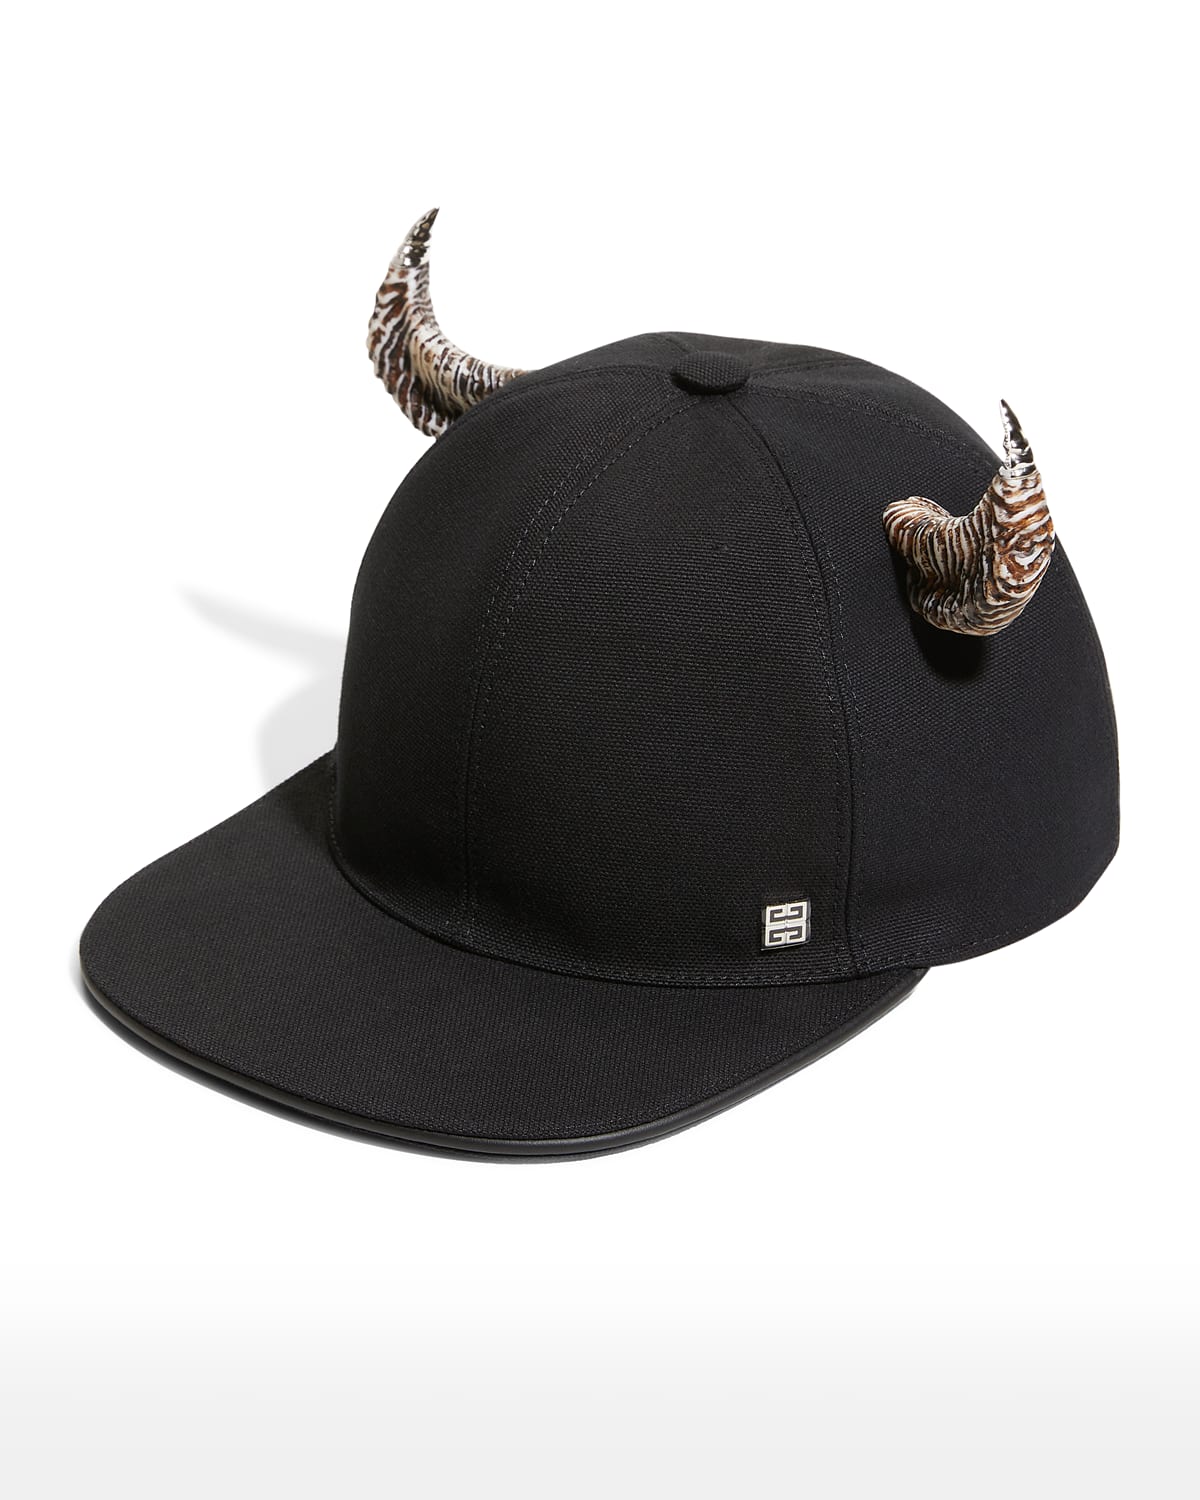 GIVENCHY Hats for Men | ModeSens